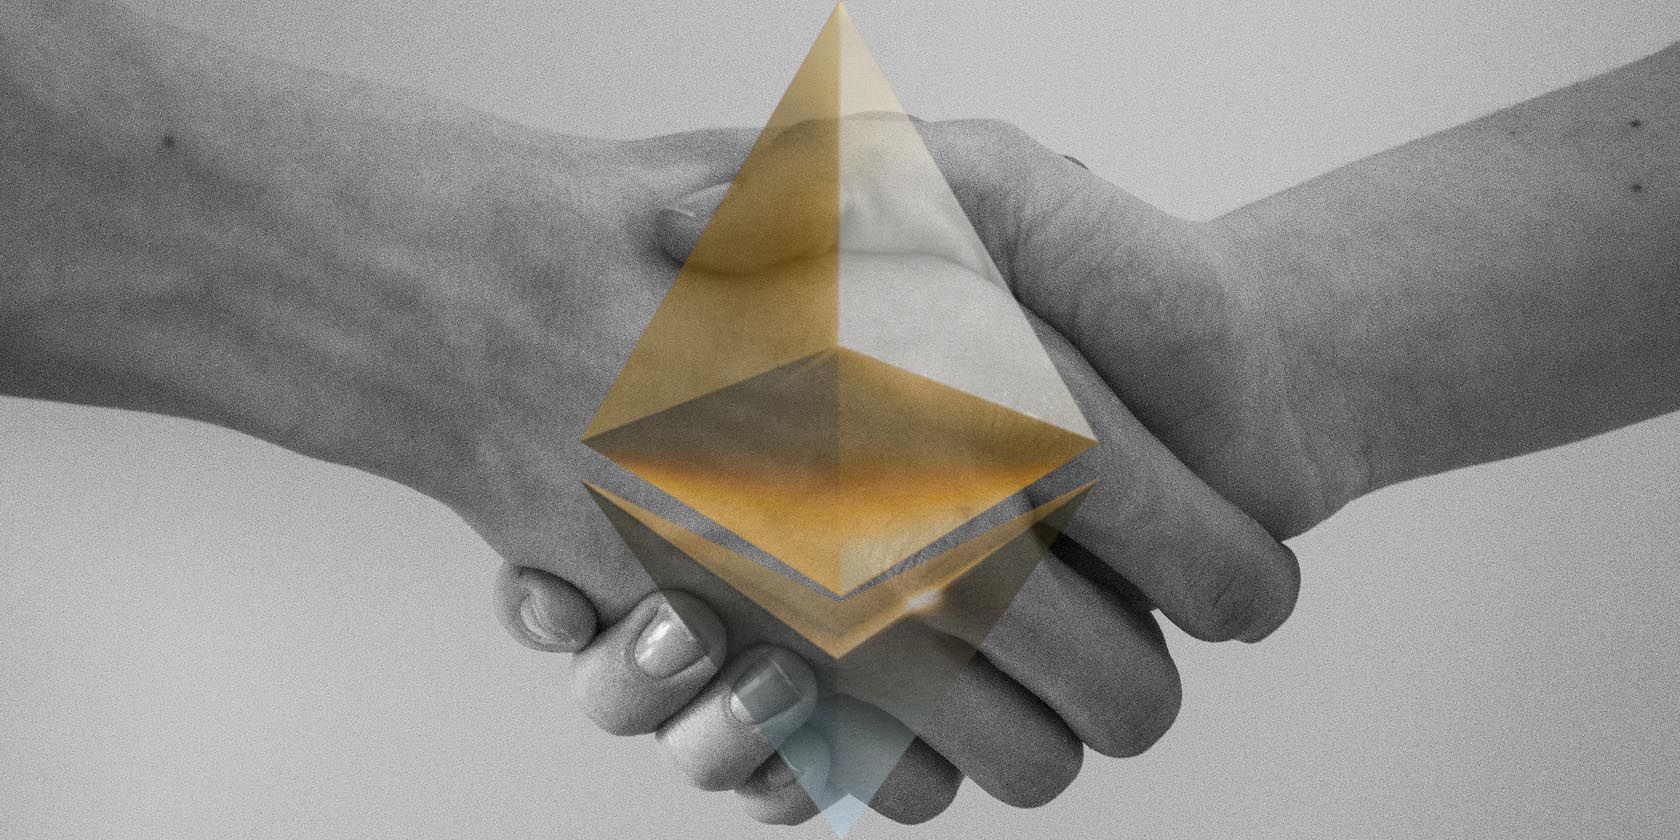 Smart contracts on Ethereum